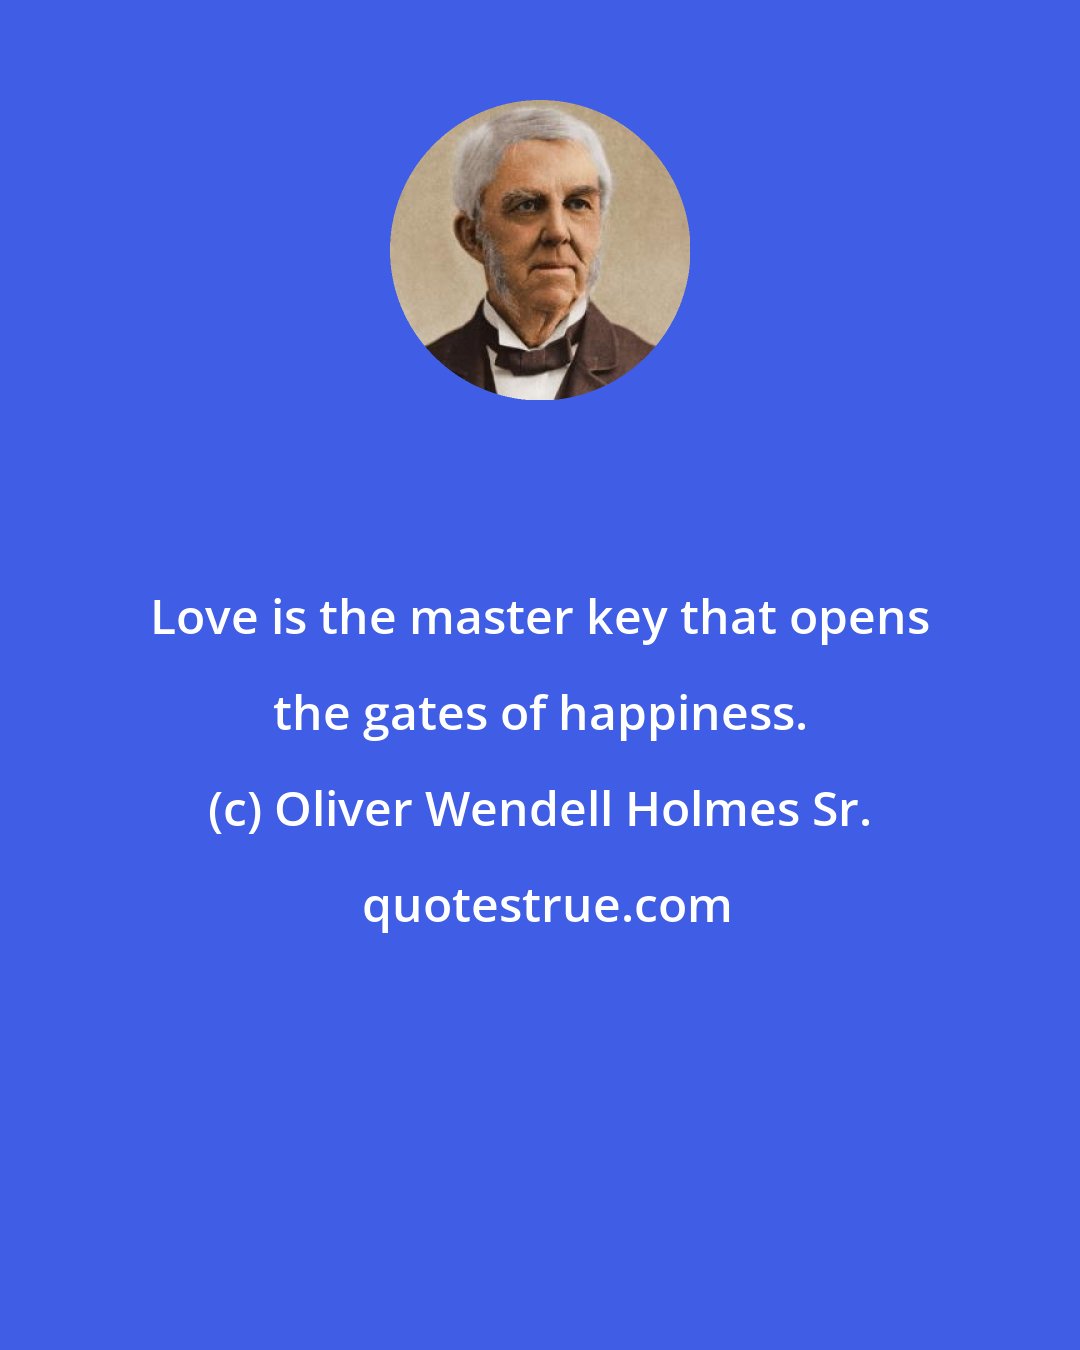 Oliver Wendell Holmes Sr.: Love is the master key that opens the gates of happiness.